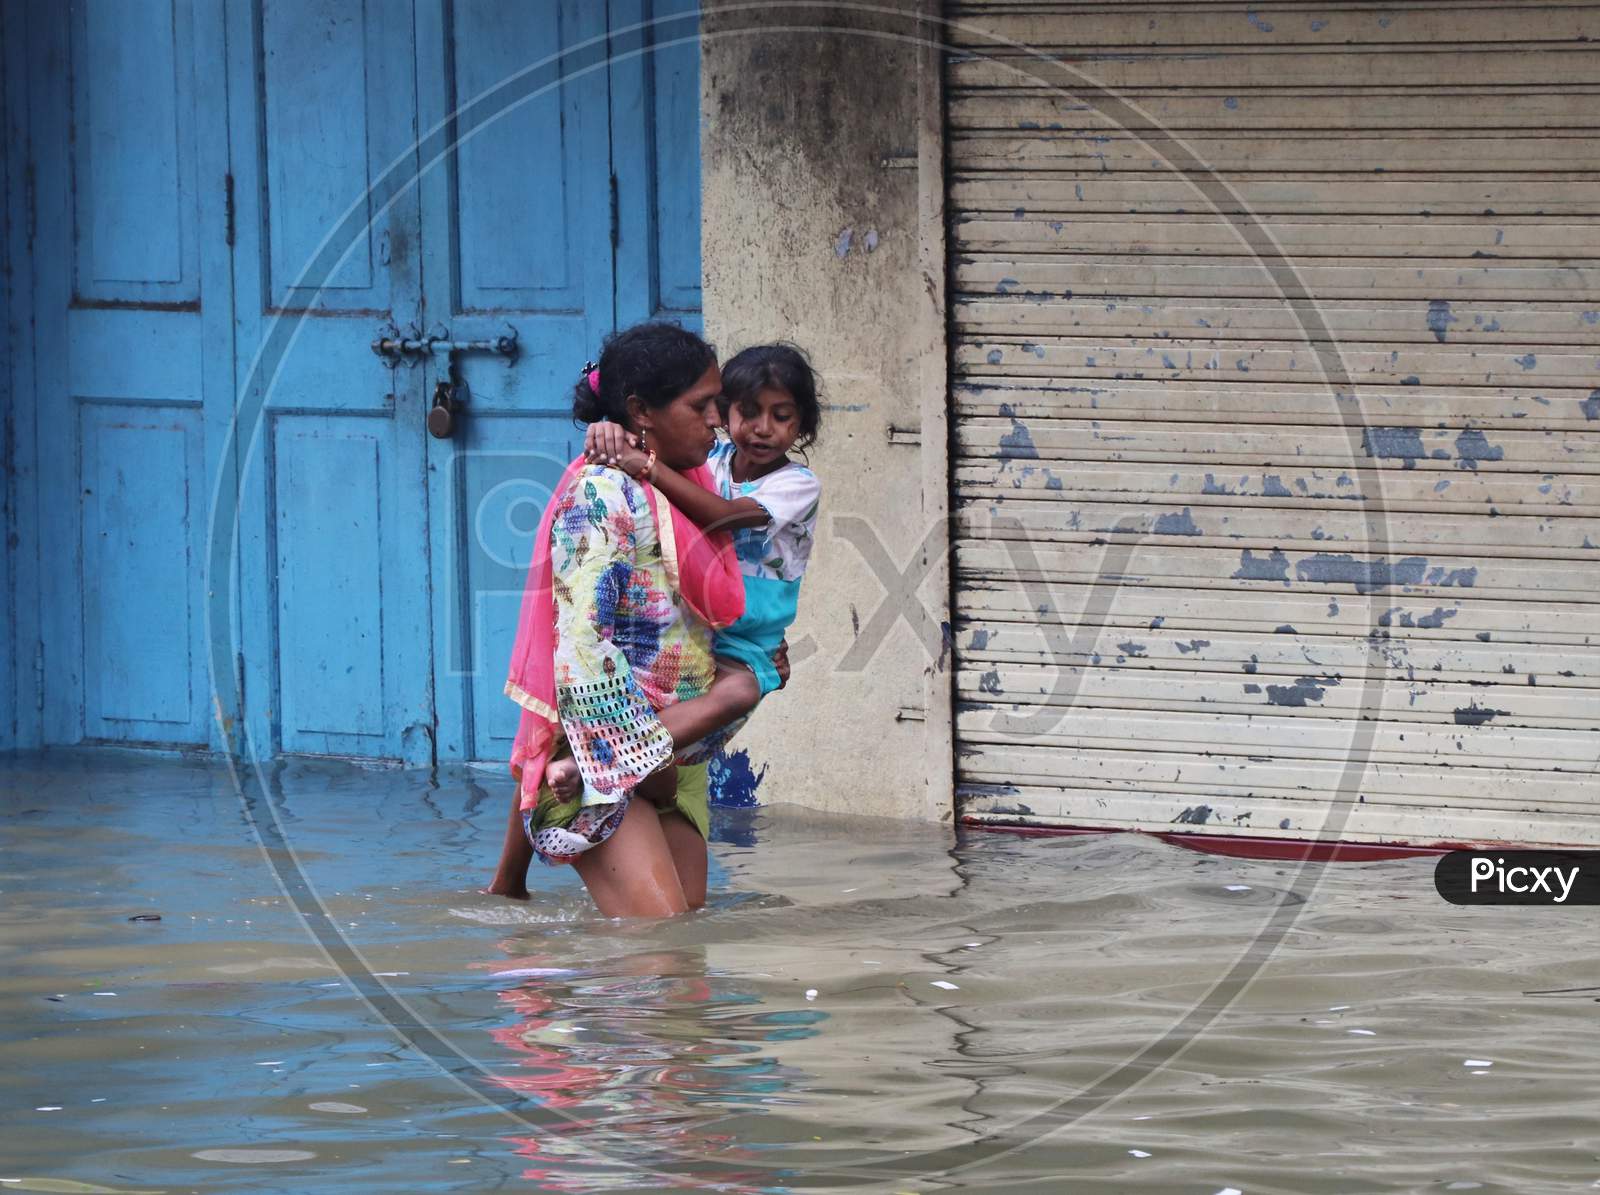 A woman carries a child through a waterlogged road after heavy rainfall in Mumbai, India, September 23, 2020.